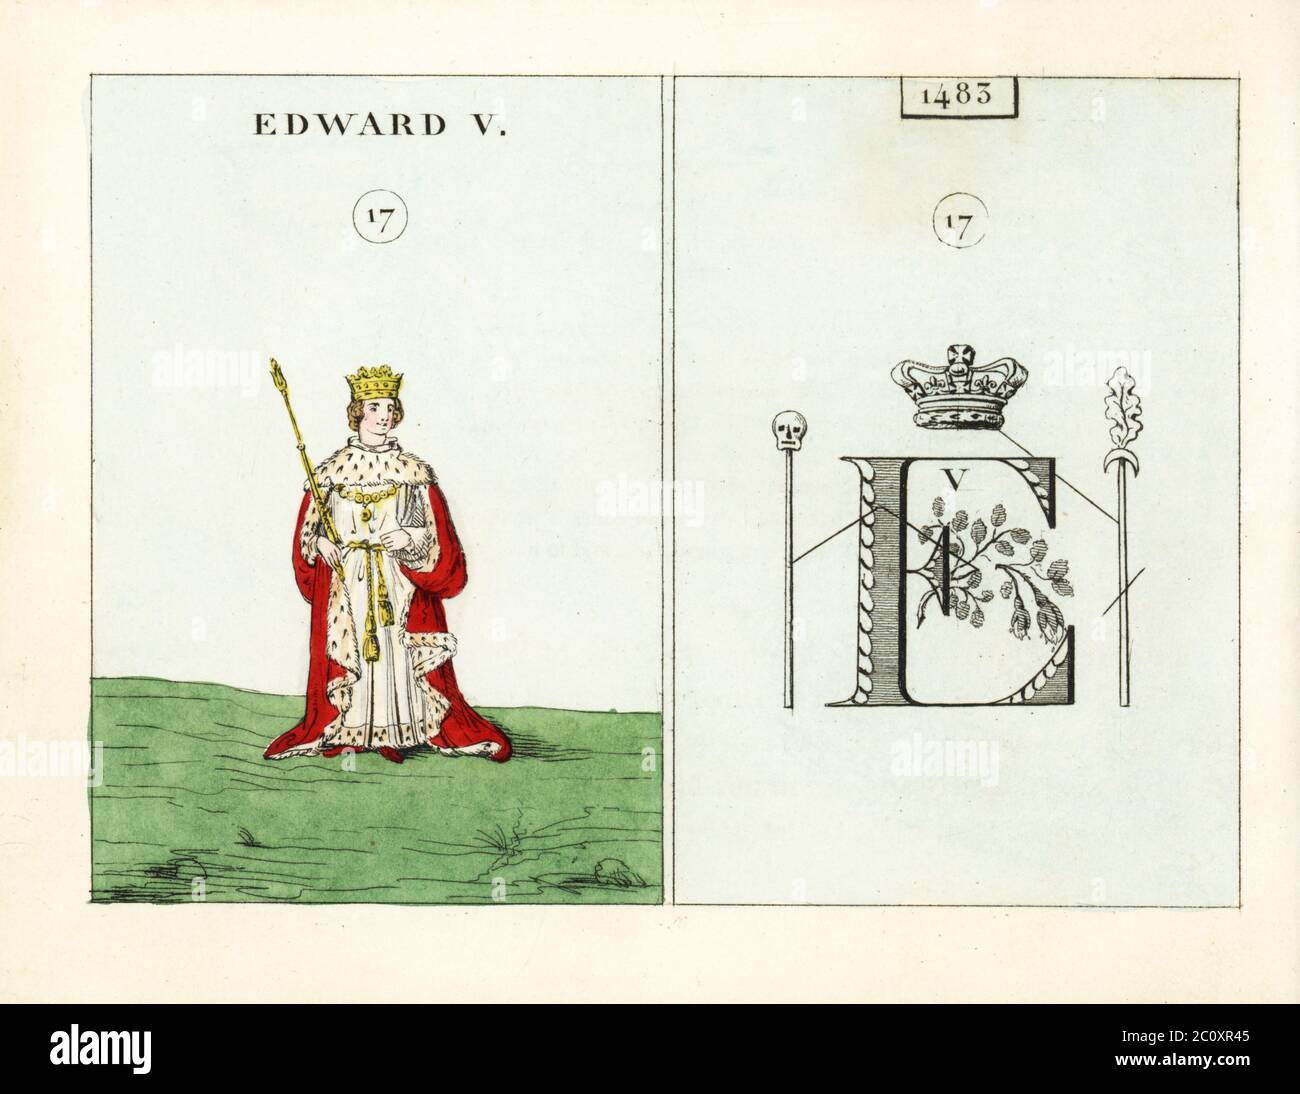 Portrait of King Edward V of England. With crown, sceptre, ermine mantle. Emblem indicates the Duke of Gloucester seizing the crown. Handcoloured steel engraving after an illustration by Mary Ann Rundall from A Symbolical History of England, from Early Times to the Reign of William IV, J.H. Truchy, Paris, 1839. Mary Ann Rundall was a teacher of young ladies in Bath, and published her book of mnemonic emblems in 1815. Stock Photo